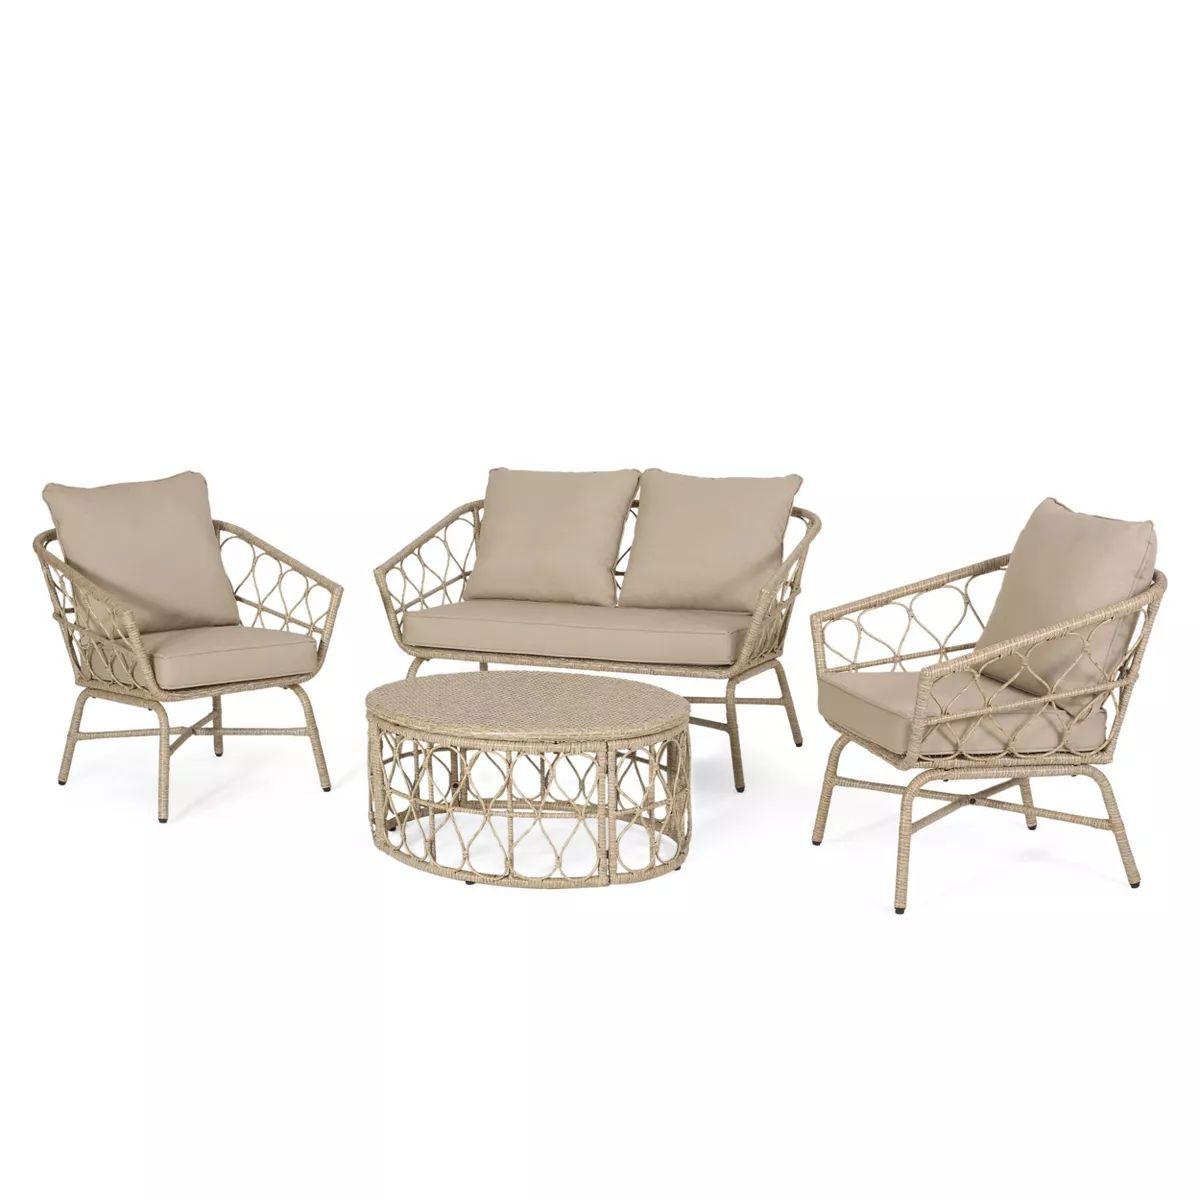 4pc Bruce Outdoor Wicker Set with Cushions Light Brown/Beige - Christopher Knight Home | Target